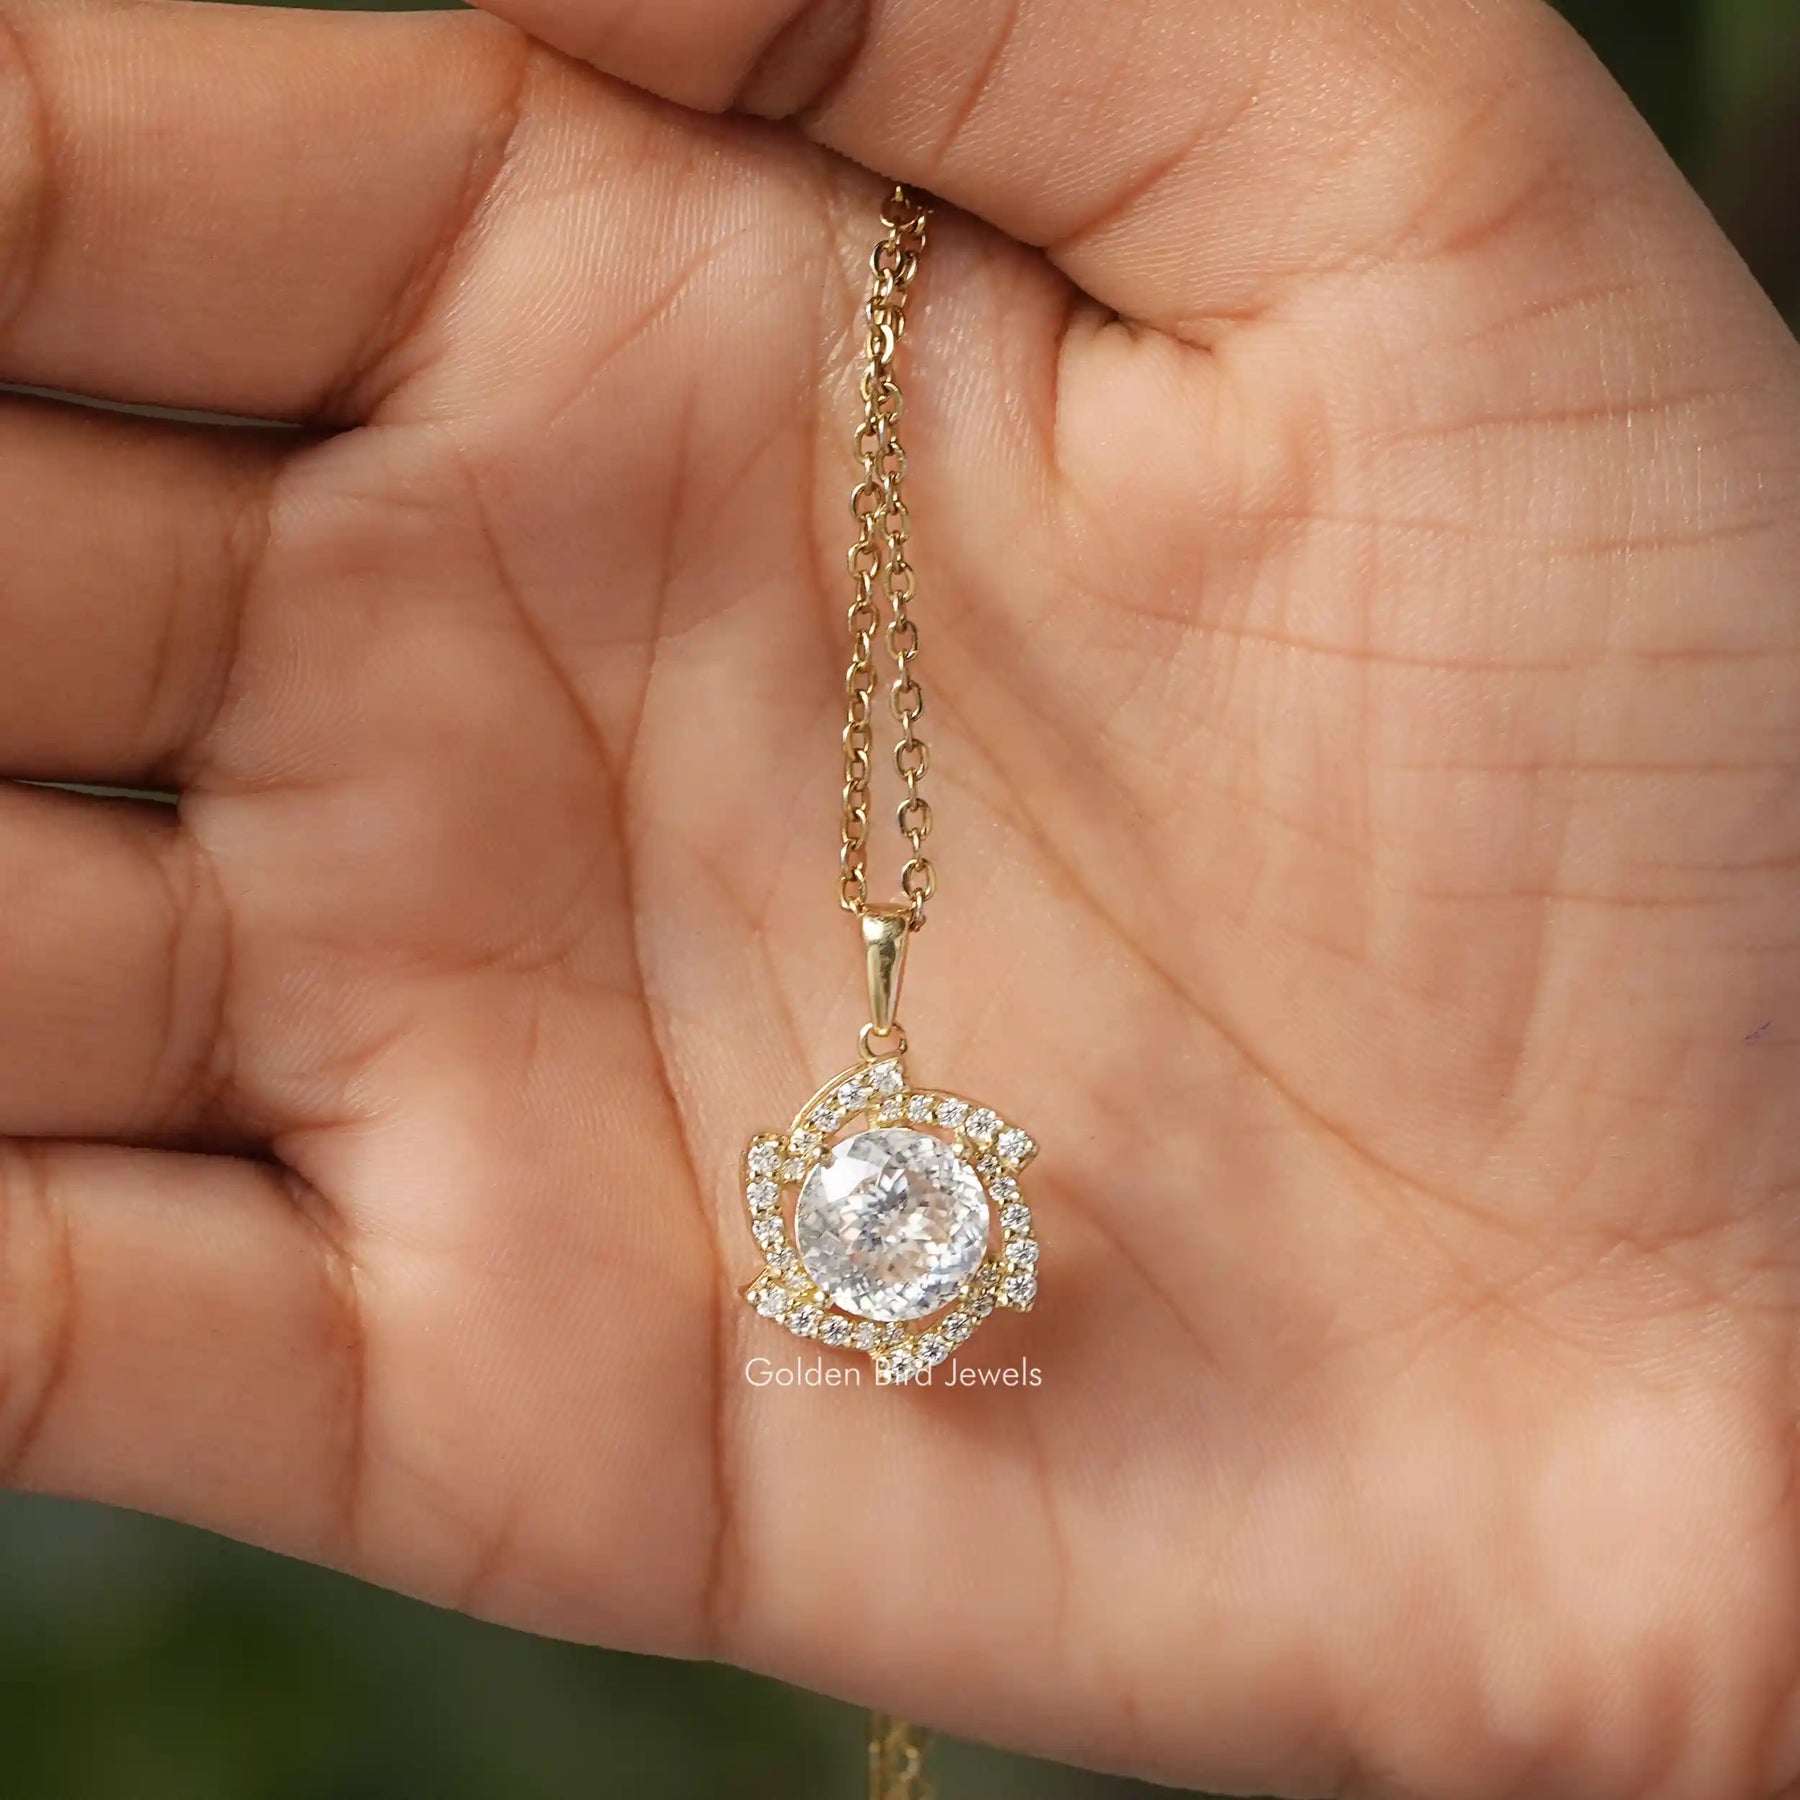 [This colorless portuguese cut moissanite pendant made of vvs clarity]-[Golden Bird Jewels]